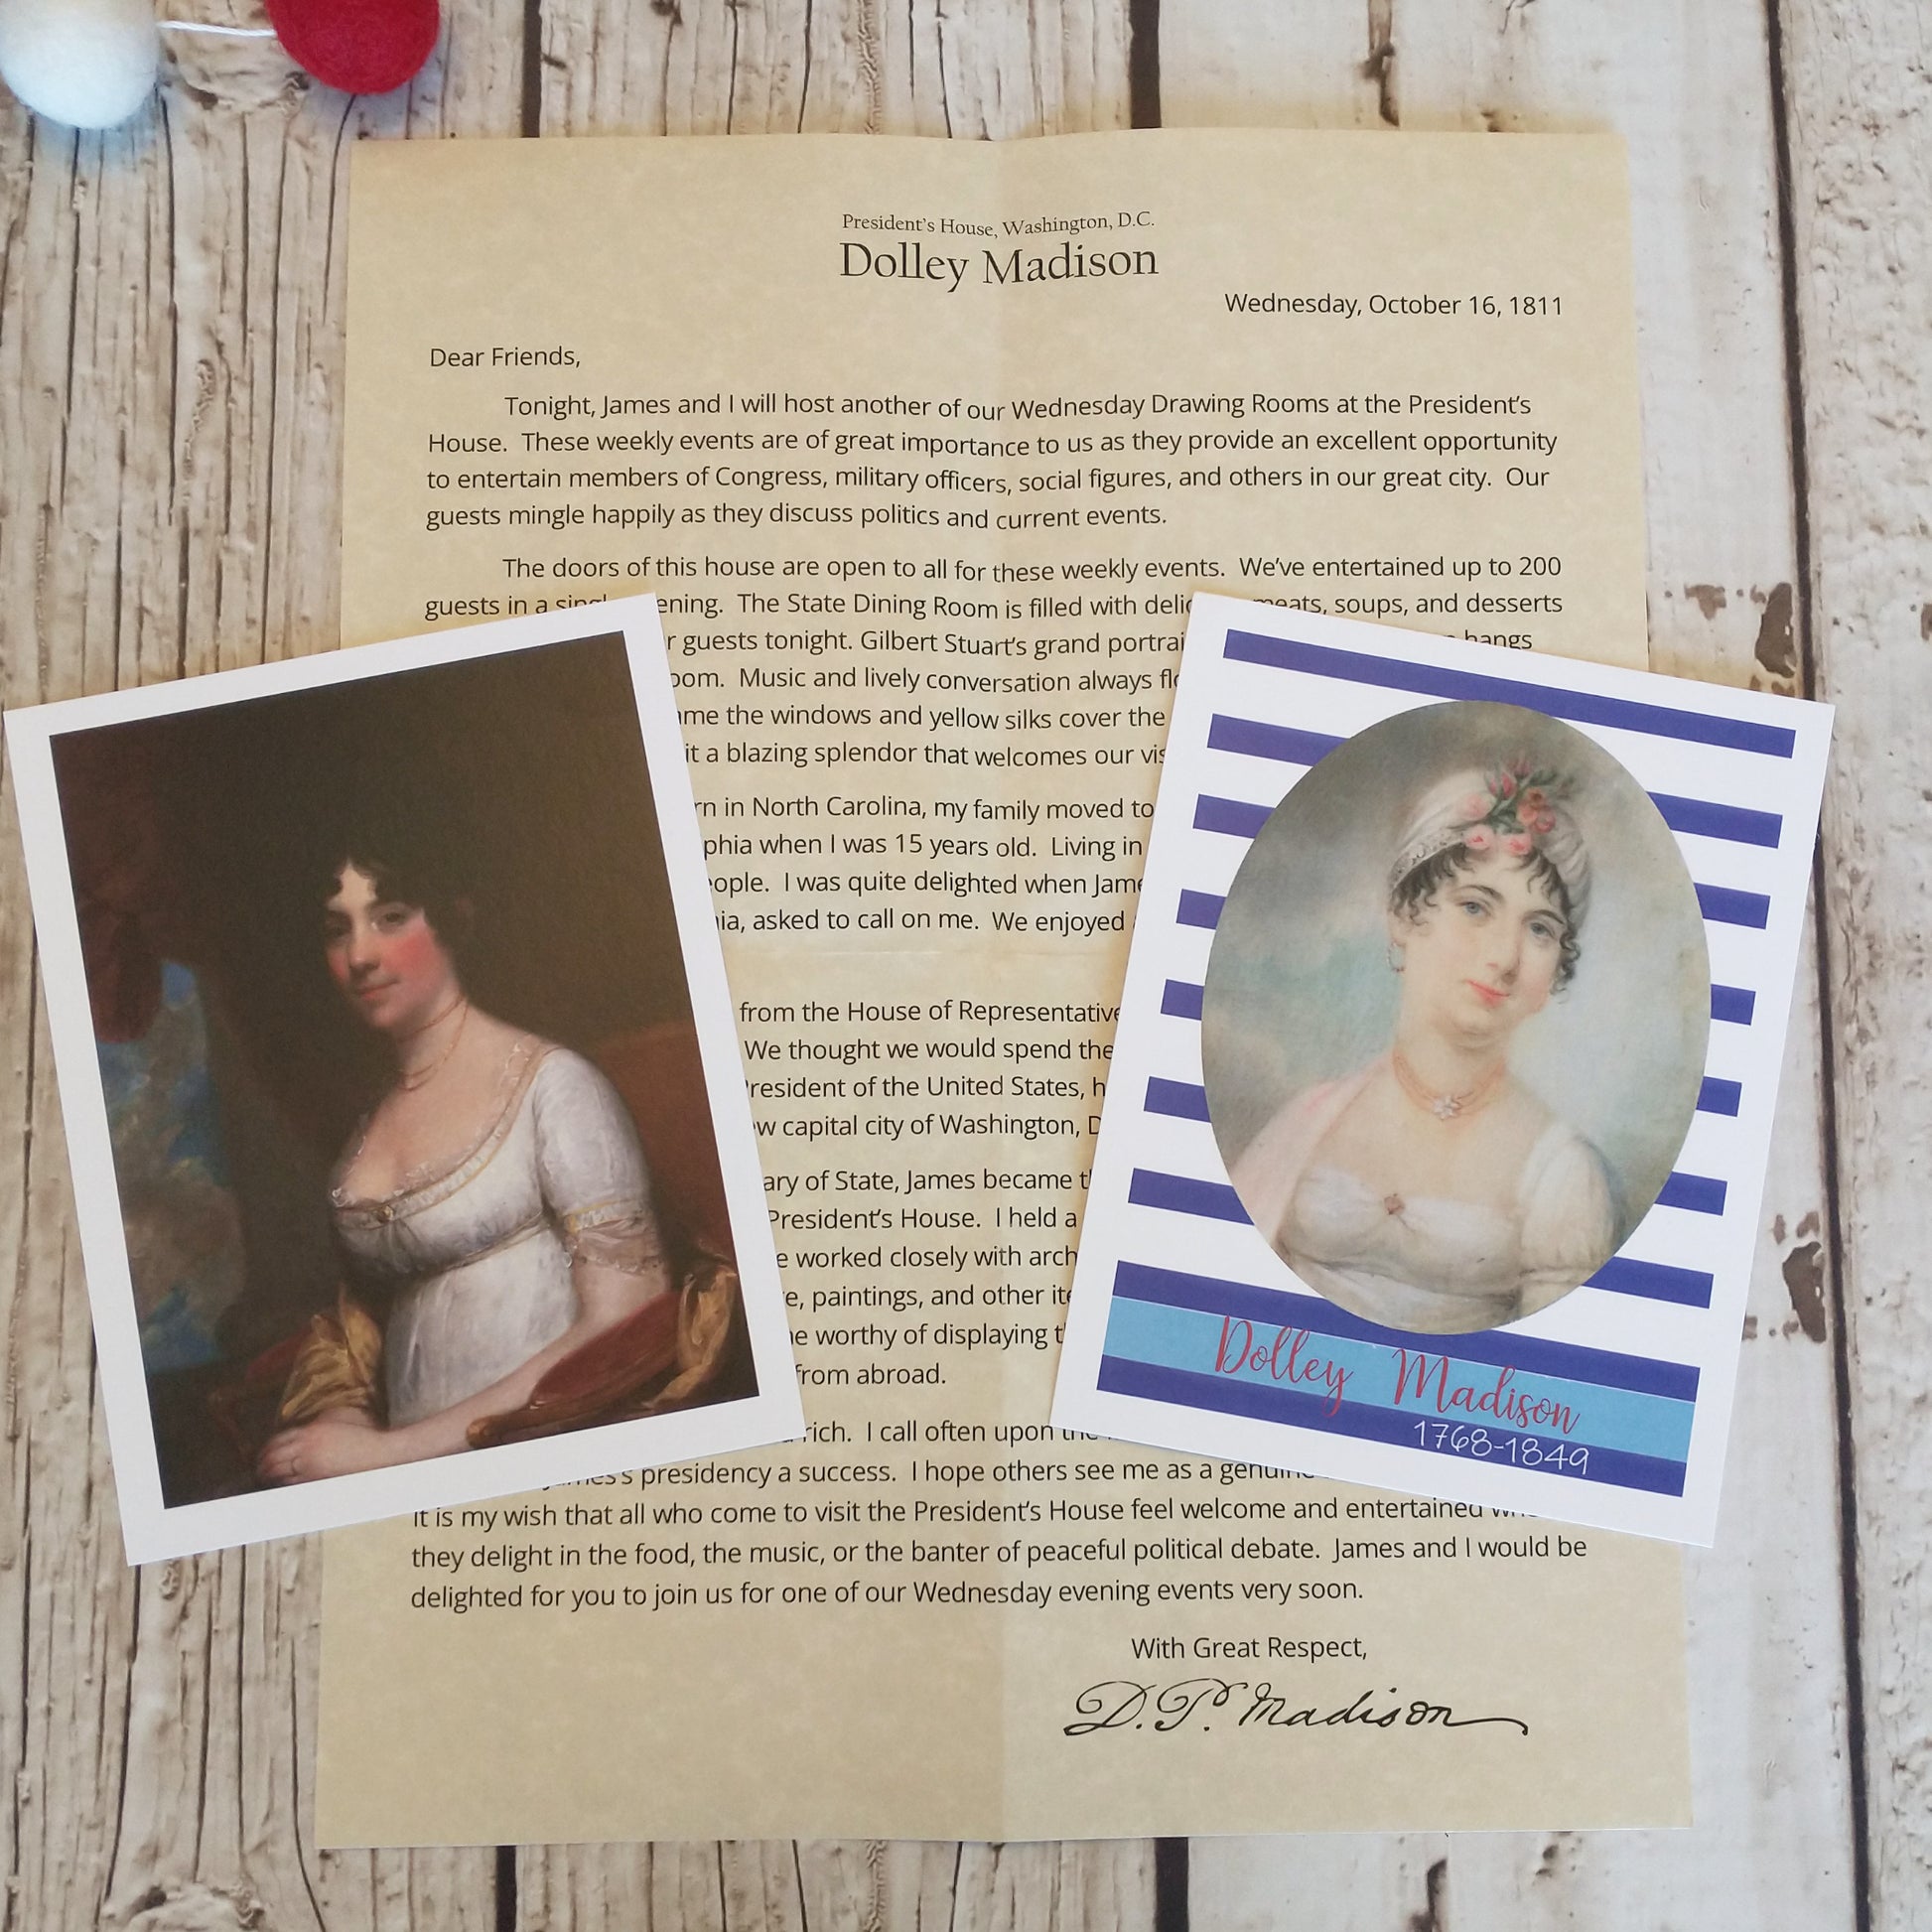 Dolley Madison Heritage Letter